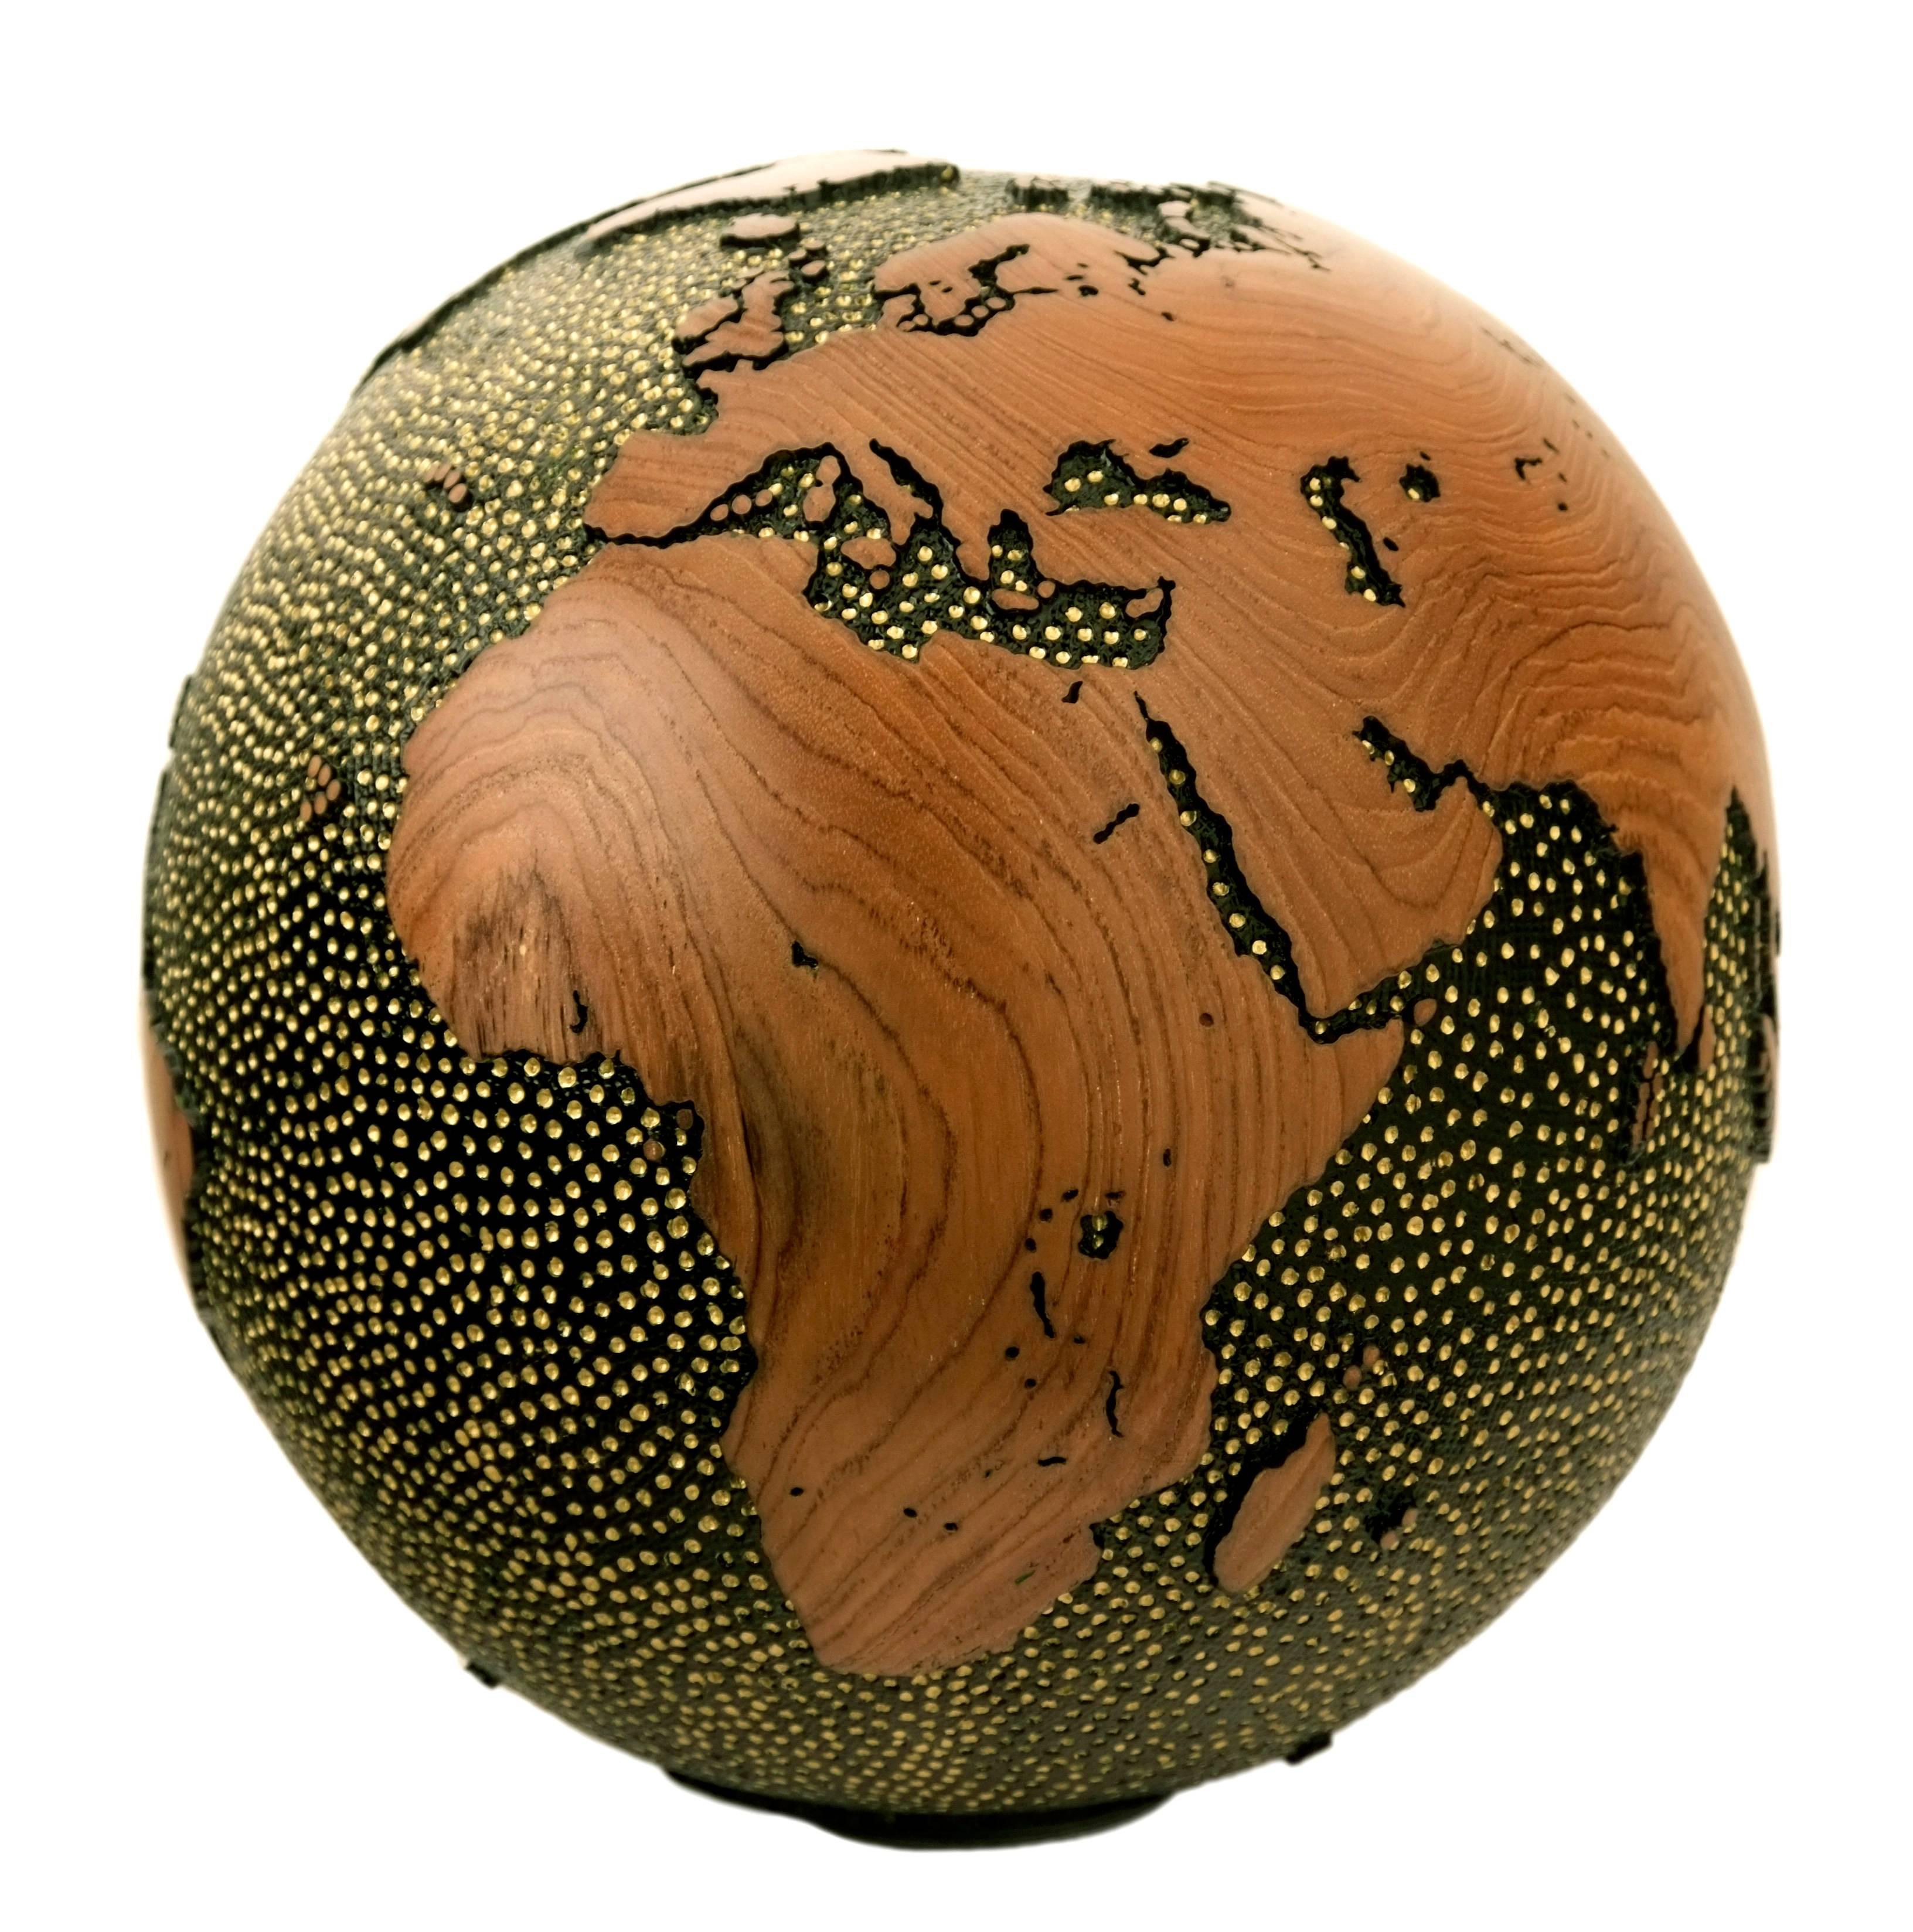 Be humble for you are made of earth
Be noble for you are made of stars.

Hand-carved wooden globe made from reclaimed teak root with copper layer, green vitrail finishing, double hammered / holes and grills textured finishing, holes filled with gold